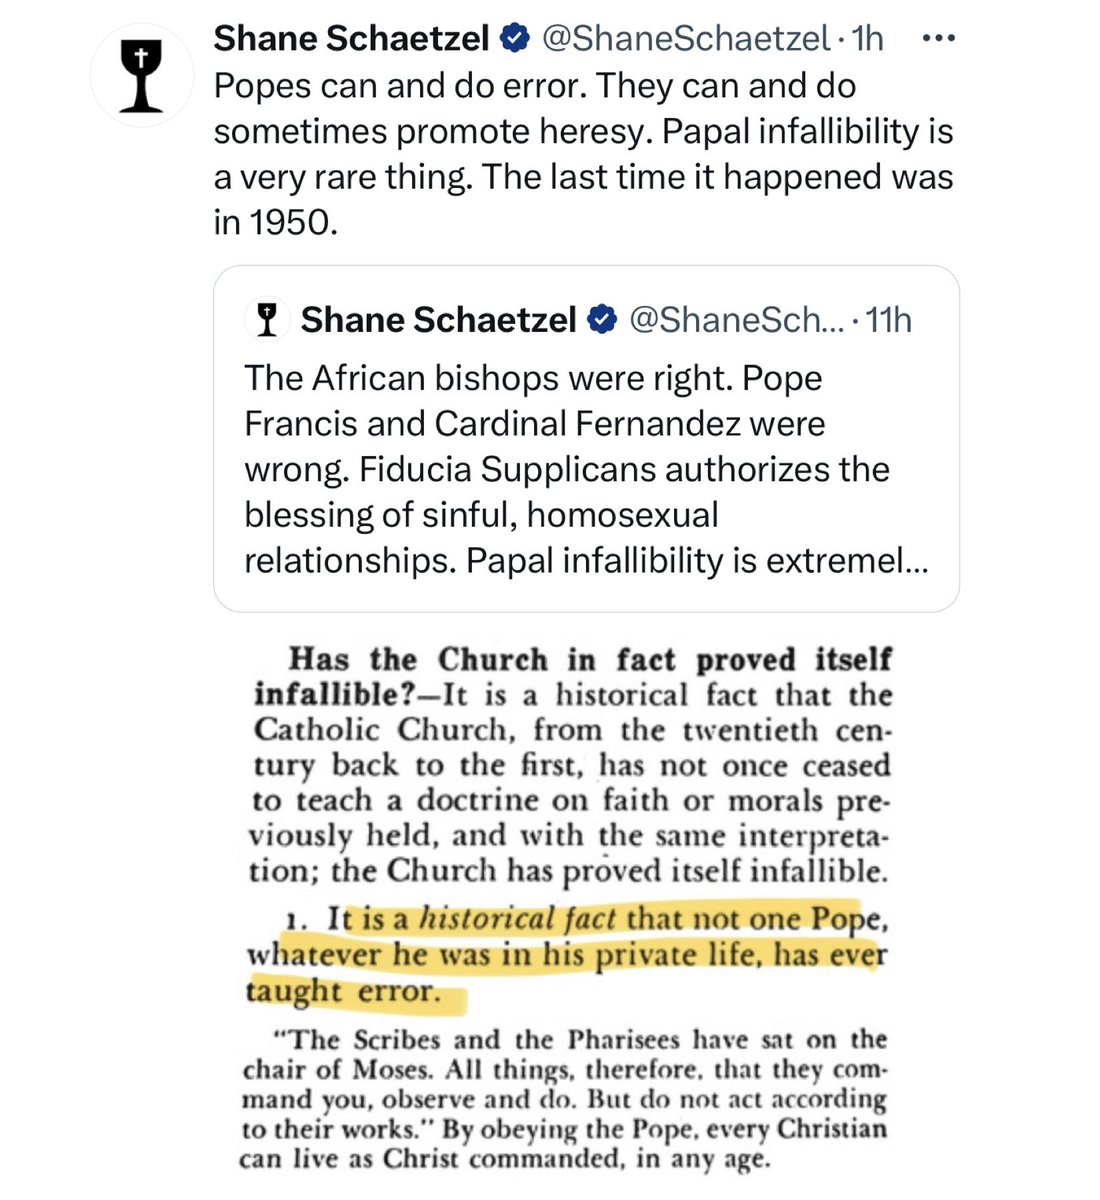 Shane -Popes can & do error -Popes can & do promote heresy -Papal Infallibility is a very rare thing and hasn’t happened since 1950 VS Catechism “It is a historical fact that not one Pope, whatever he was in his private life, has ever taught error.”